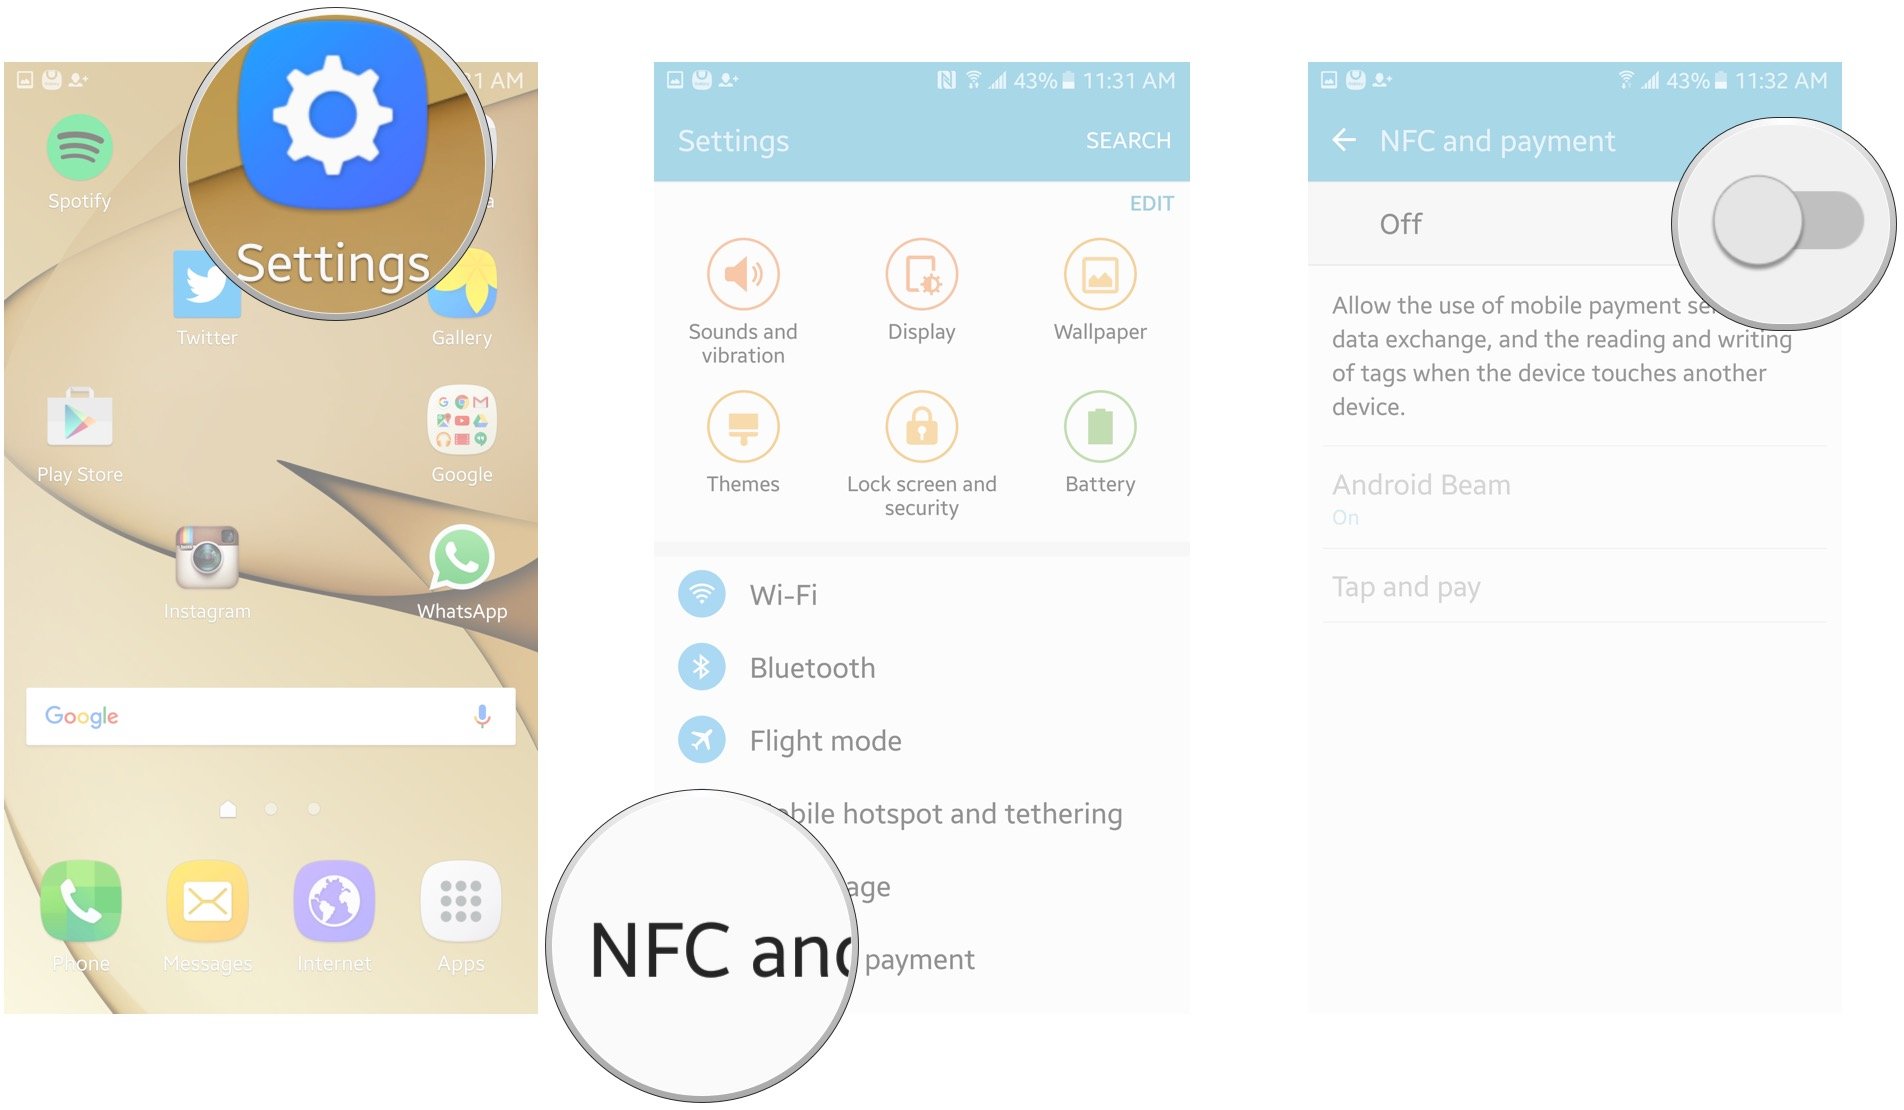 Tap NFC and pay, tap Android Beam, tap switch to turn it on